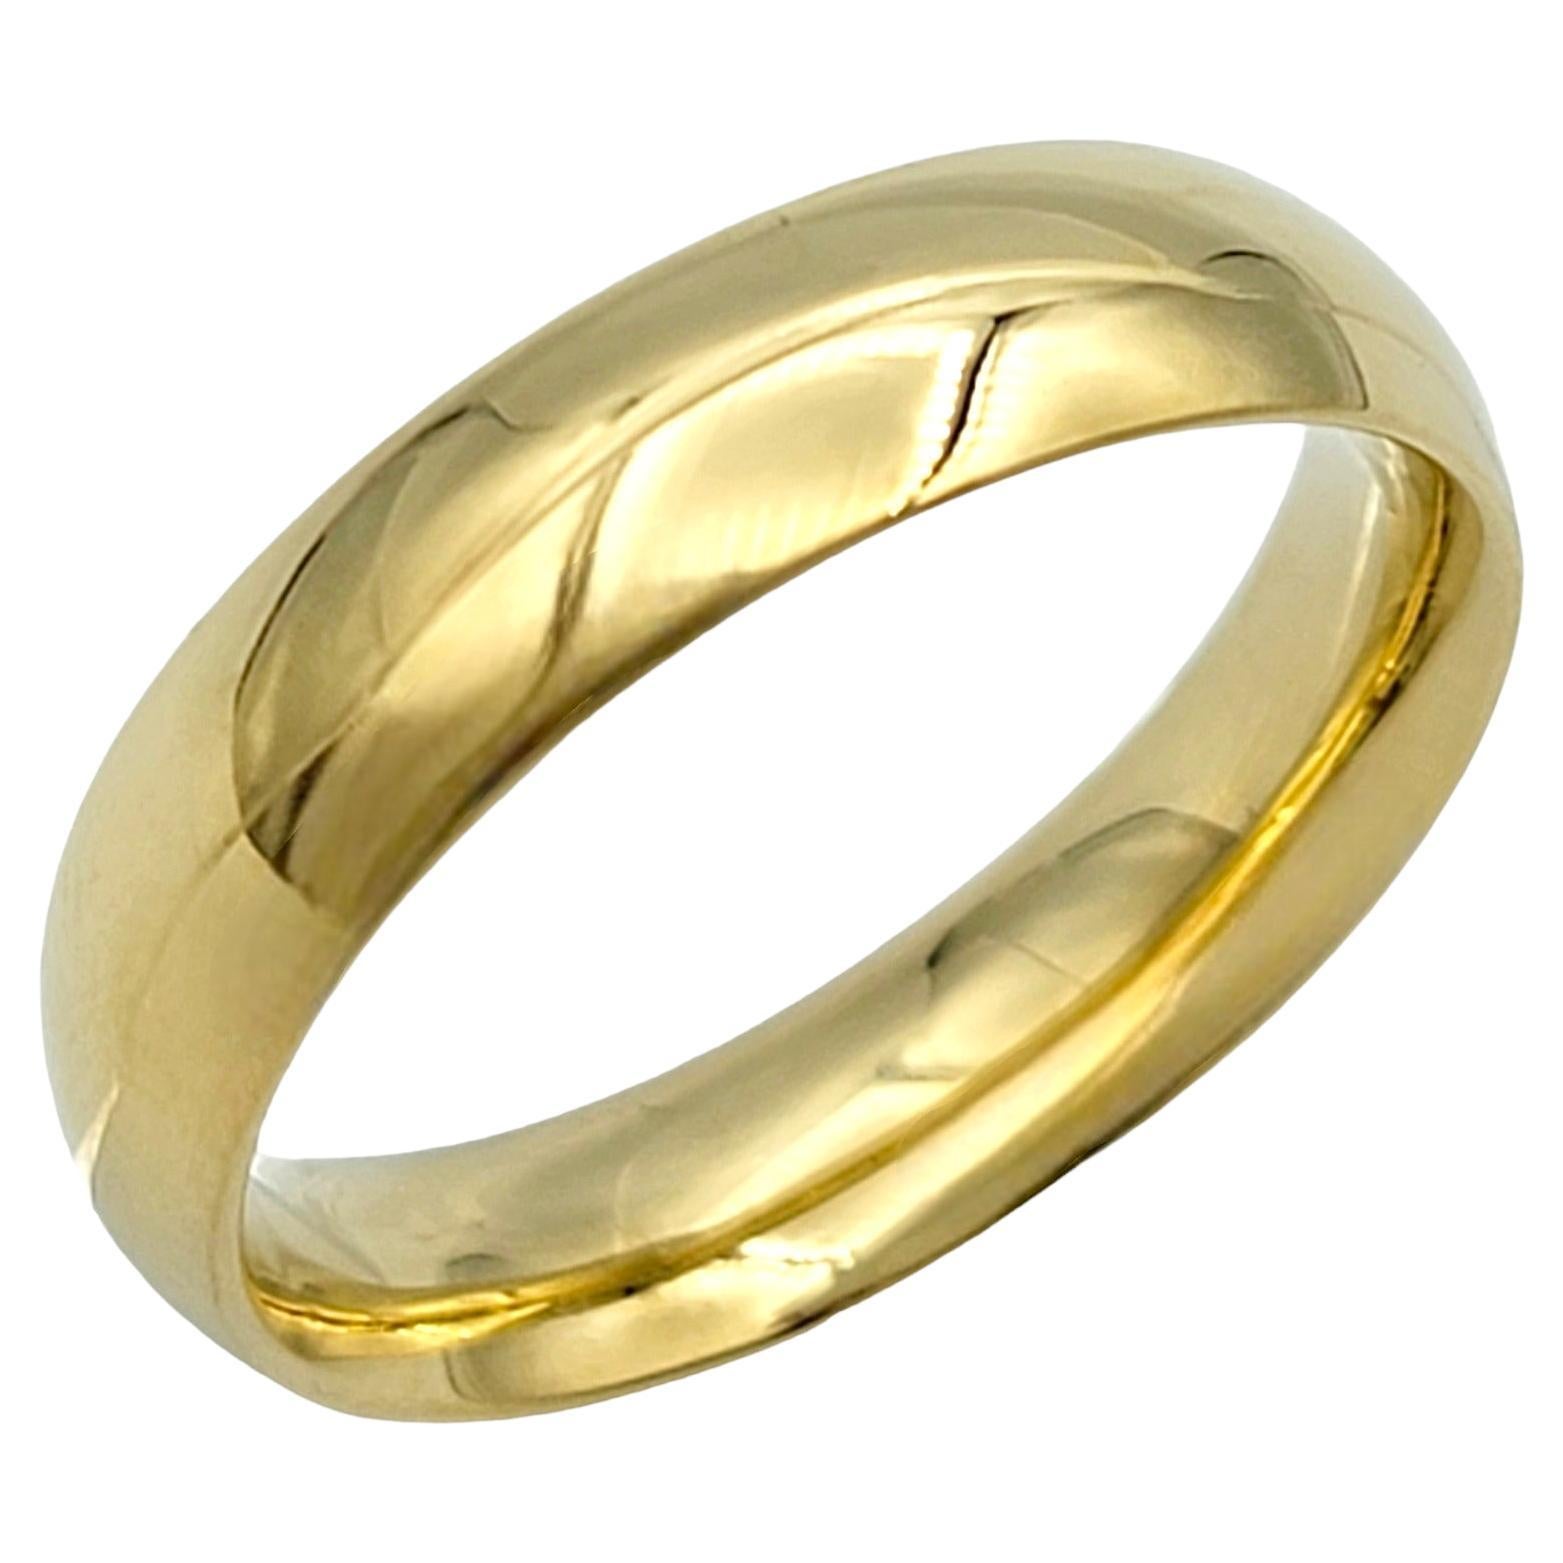 Ring Size: 8

This Georg Jensen band ring, crafted from 18 karat yellow gold, radiates timeless elegance with its high-polish finish. The smooth surface of the ring reflects light beautifully, adding a touch of luxury to any ensemble. Its simple yet